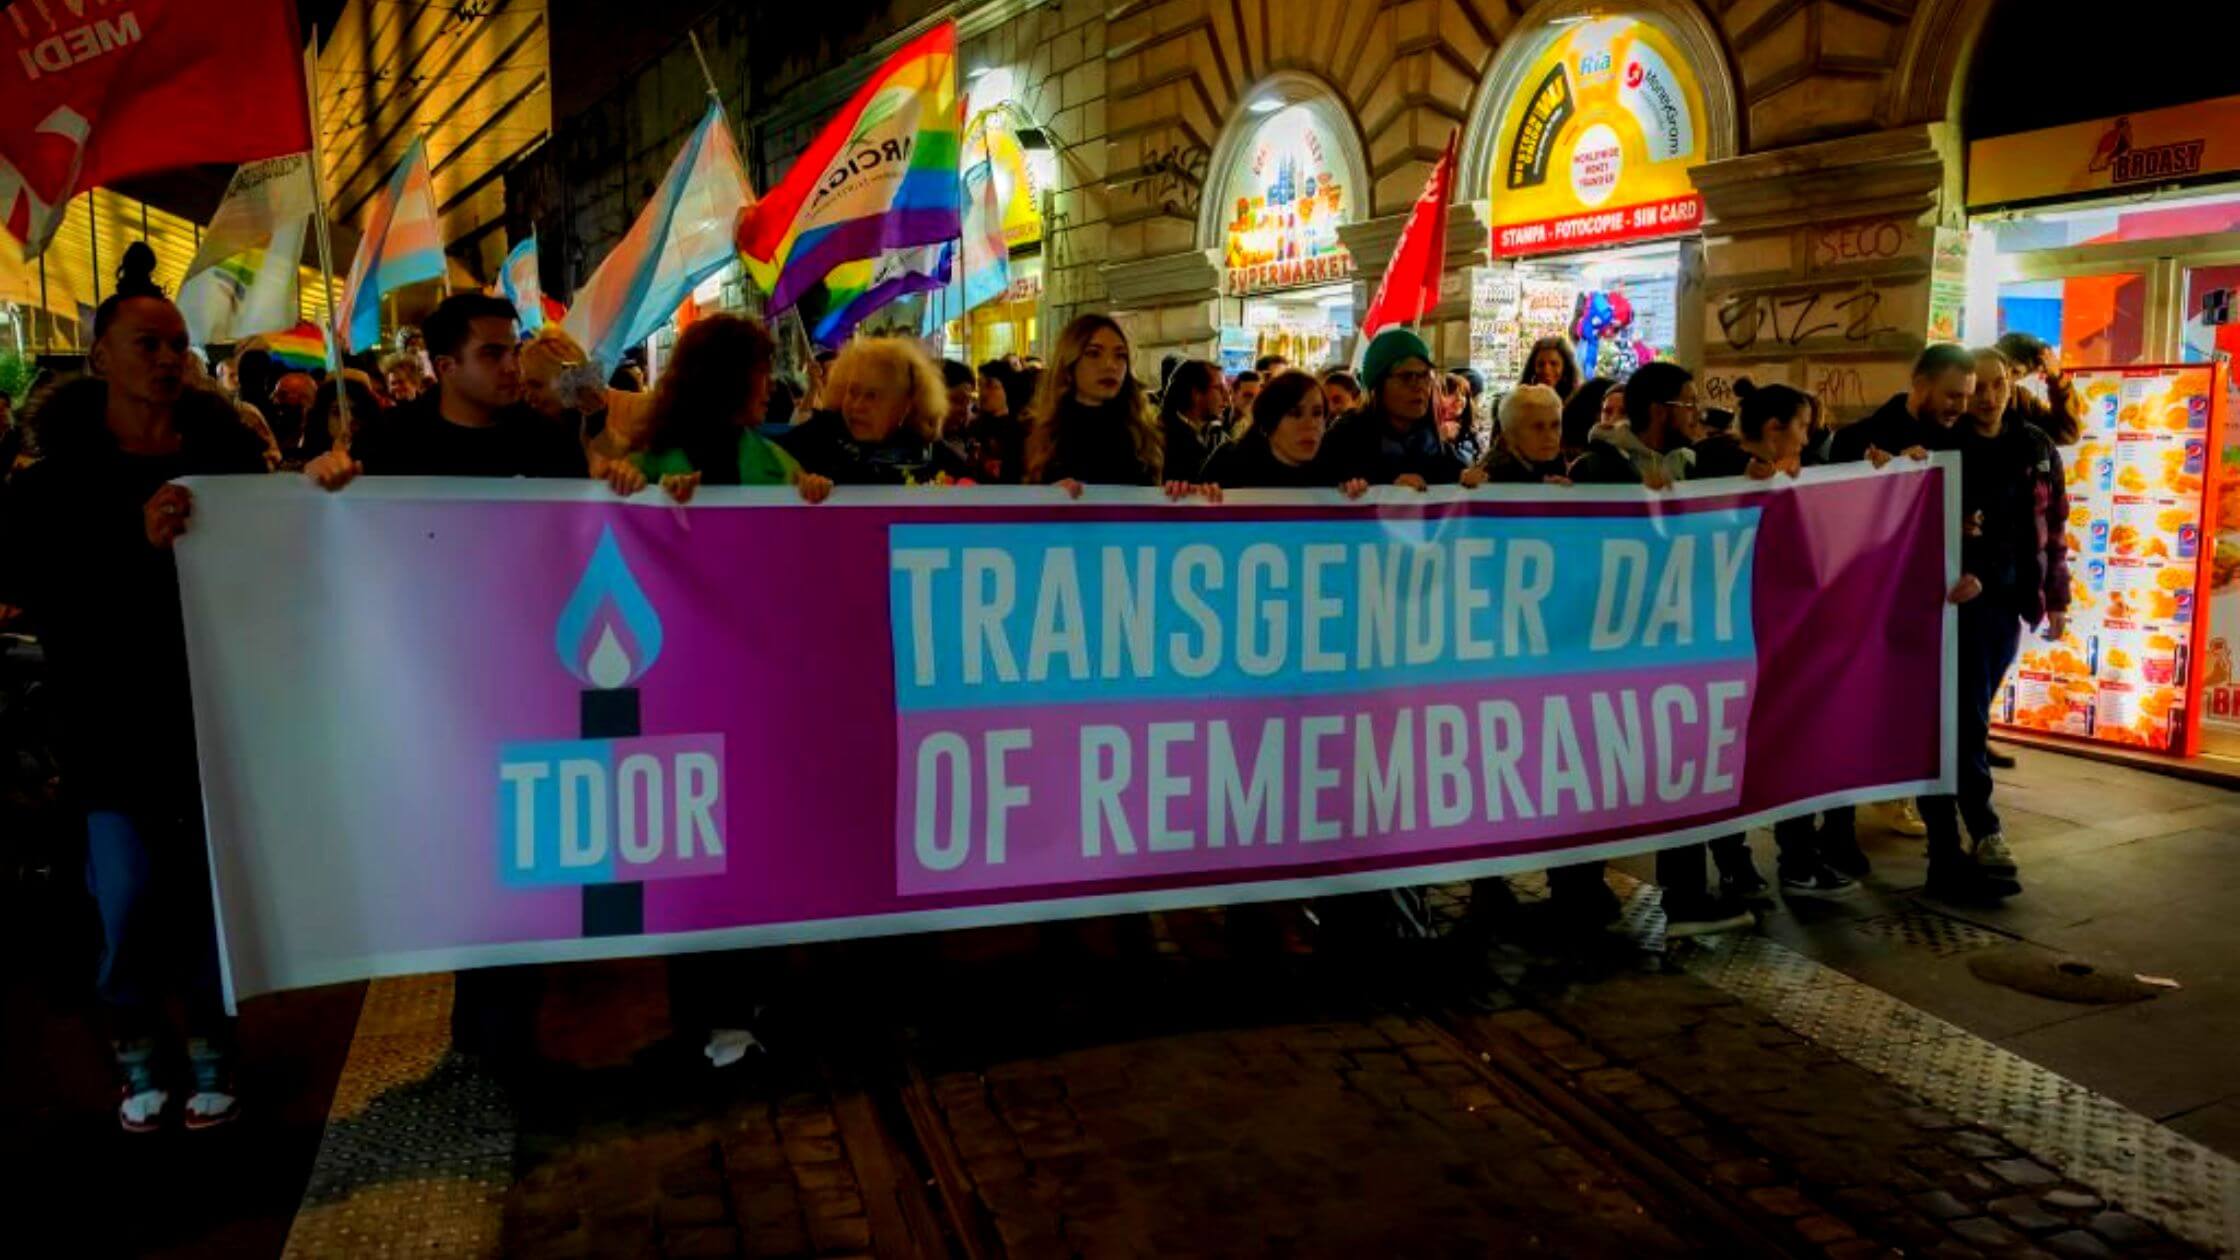 Transgender Day Of Remembrance Continues The Human Rights Fight Dedicated To Honoring Those Lost To Violence